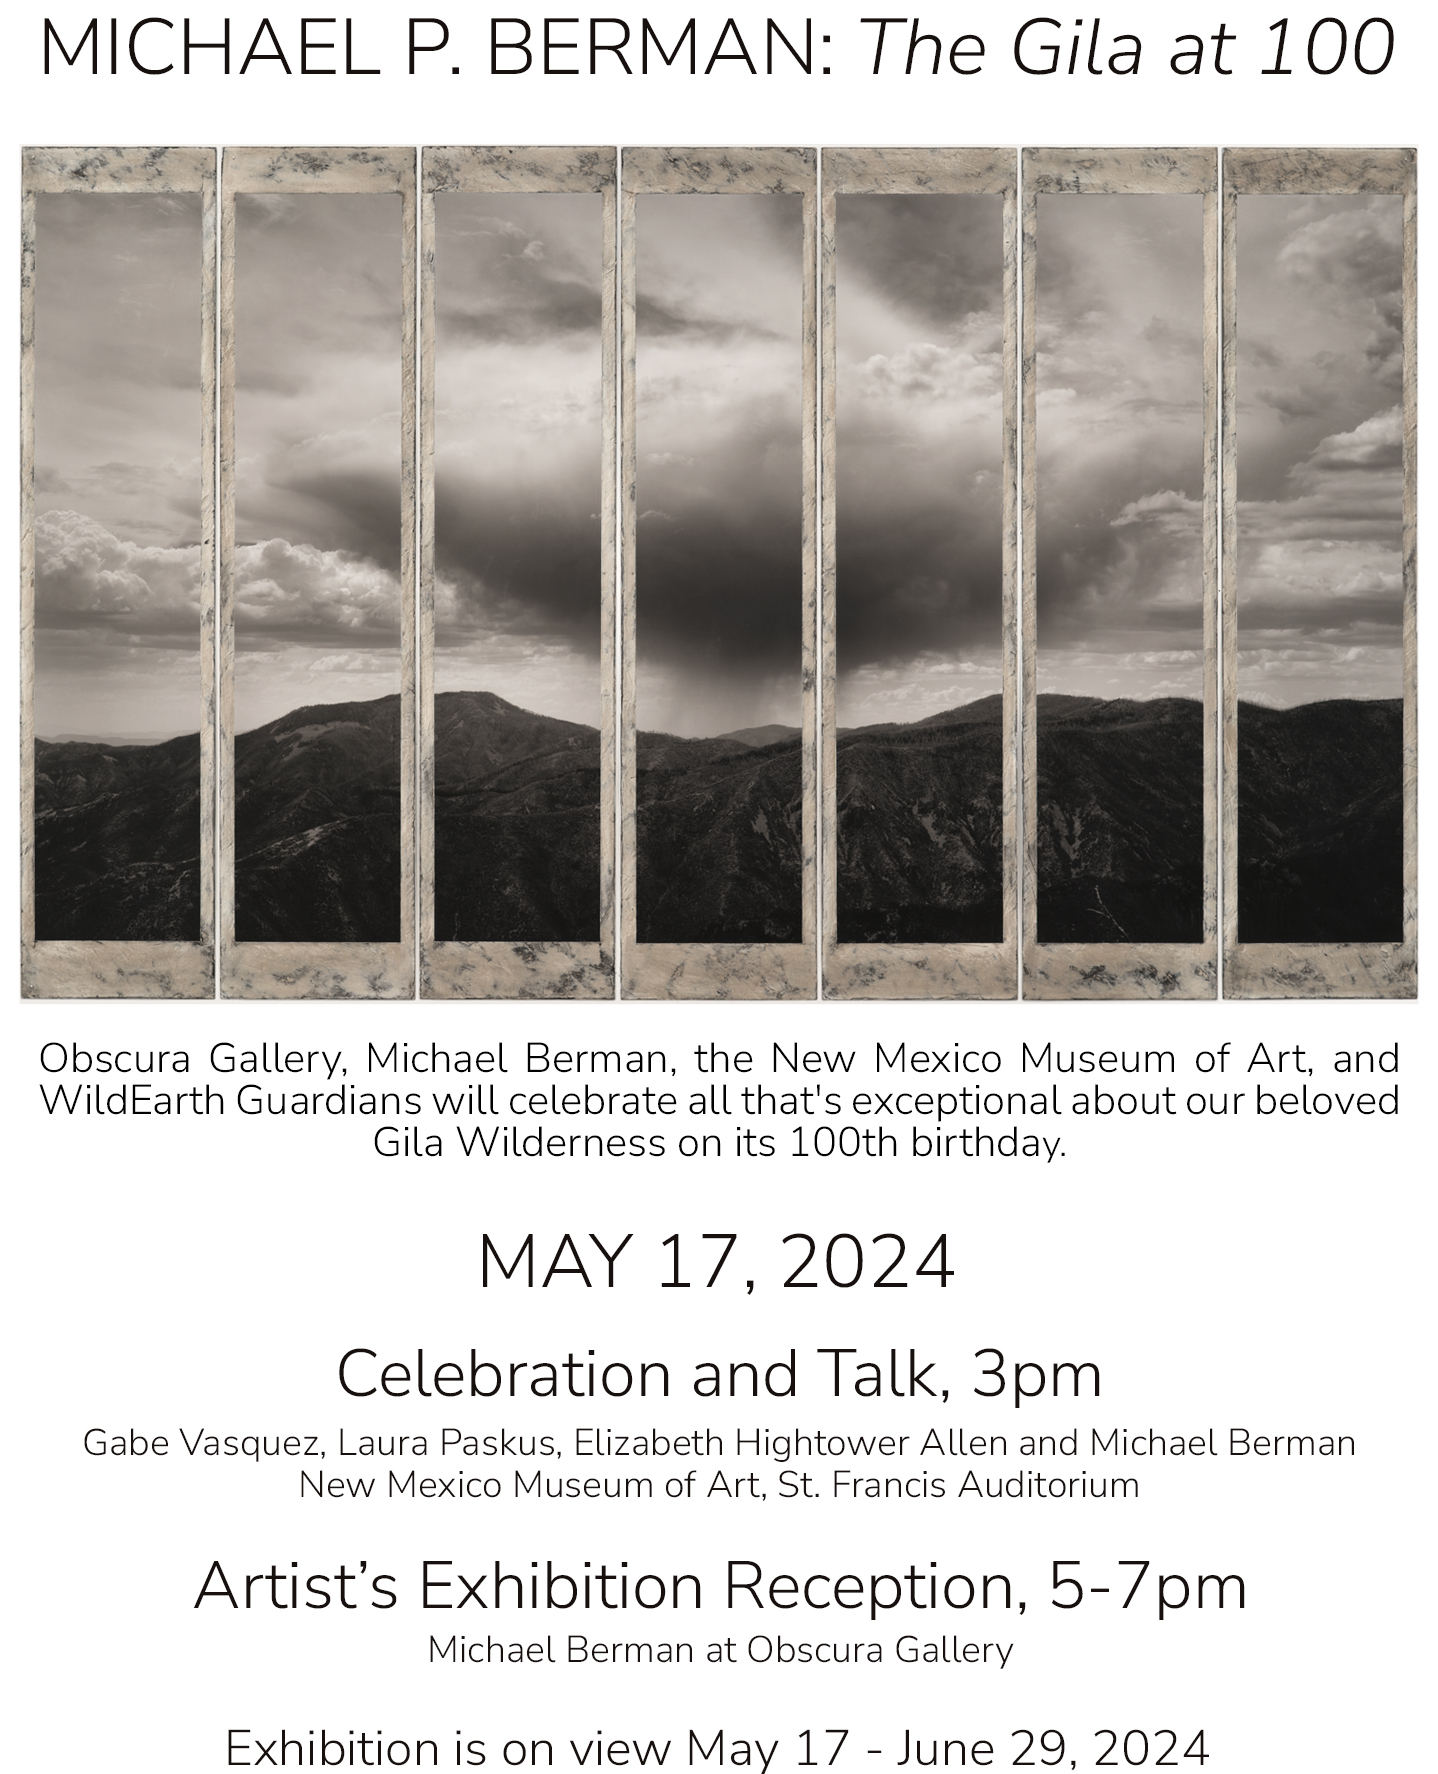 Obscura Gallery, Michael Berman, the New Mexico Museum of Art, and WildEarth Guardians will celebrate all that's exceptional about our beloved Gila Wilderness on its 100th birthday. May 17, 2024 at Obscura Gallery